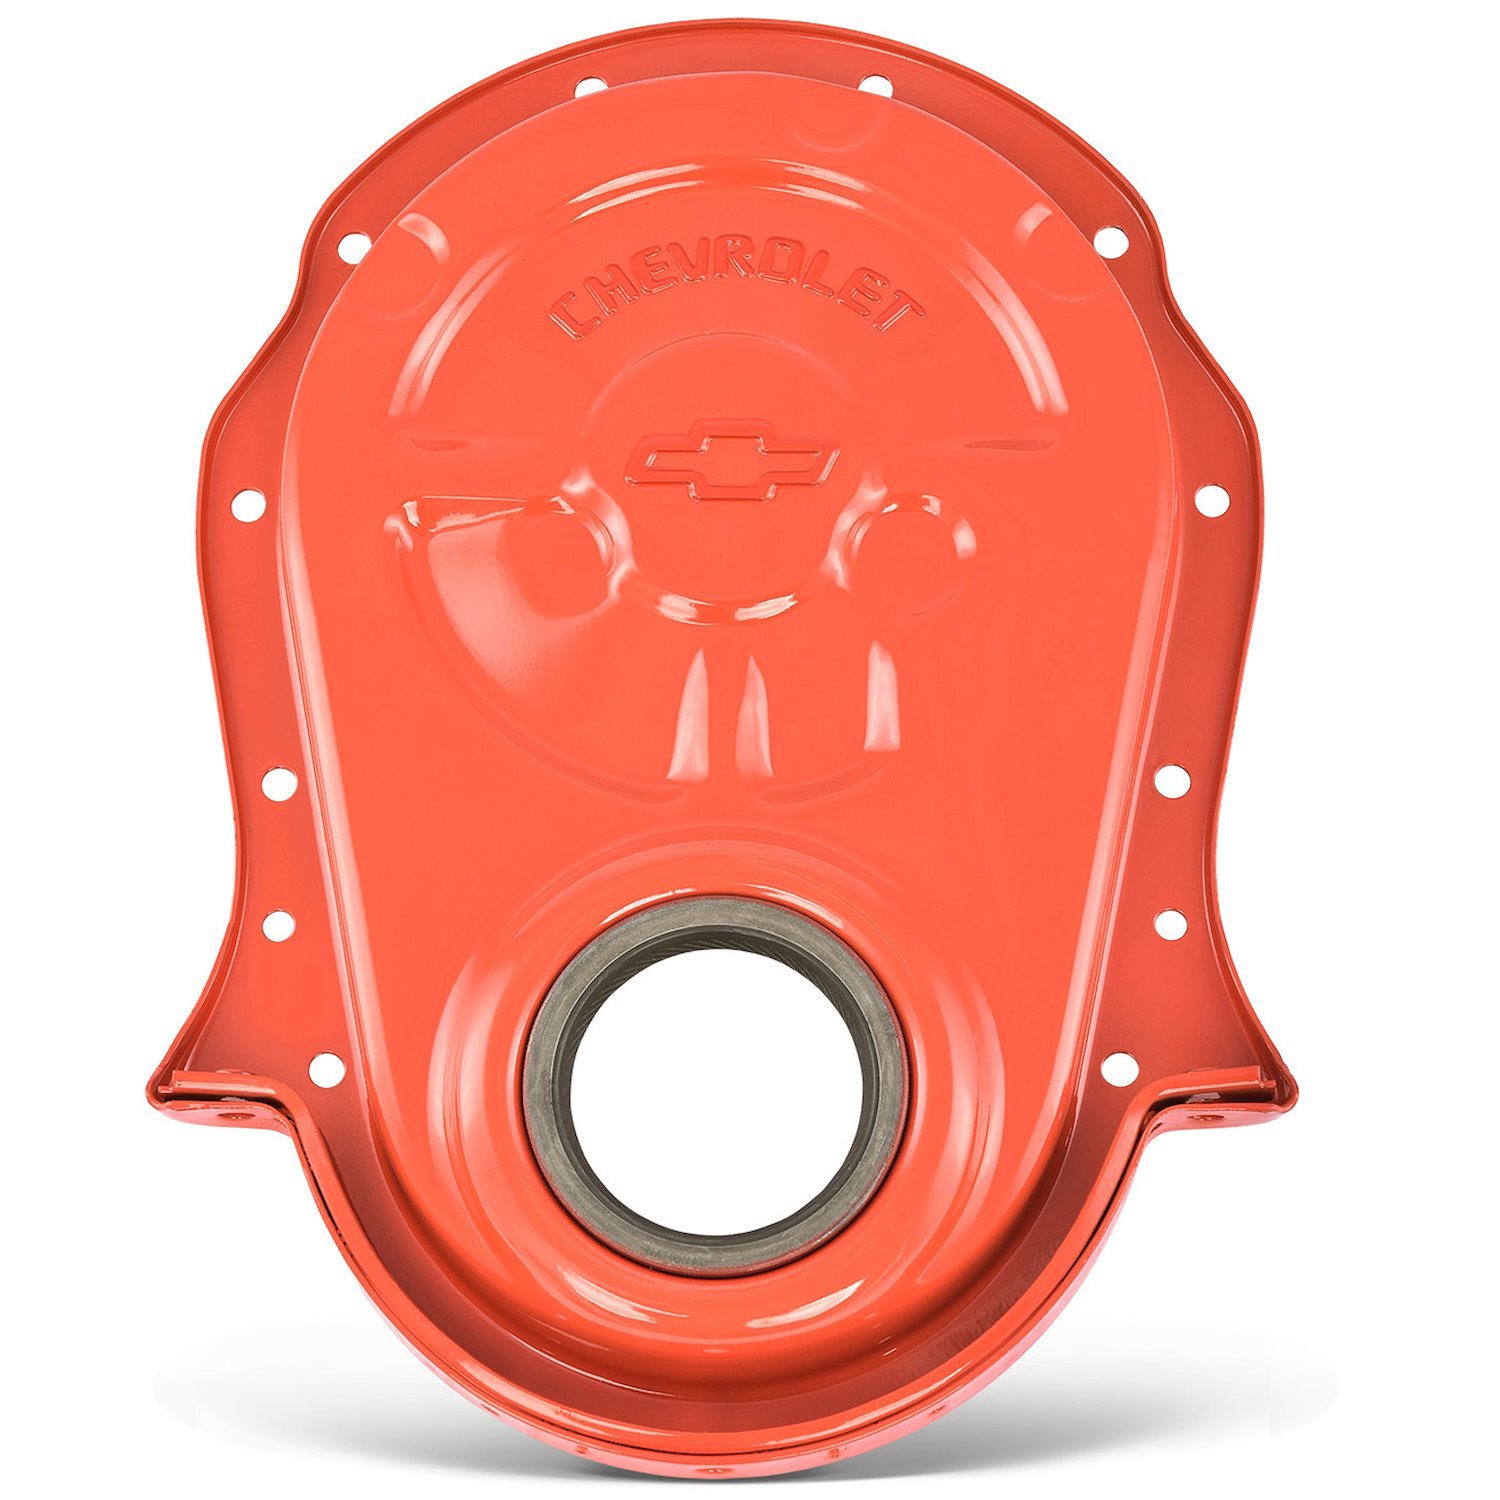 Steel Timing Chain Cover for 1965-1990 Big Block Chevy [Chevy Orange]